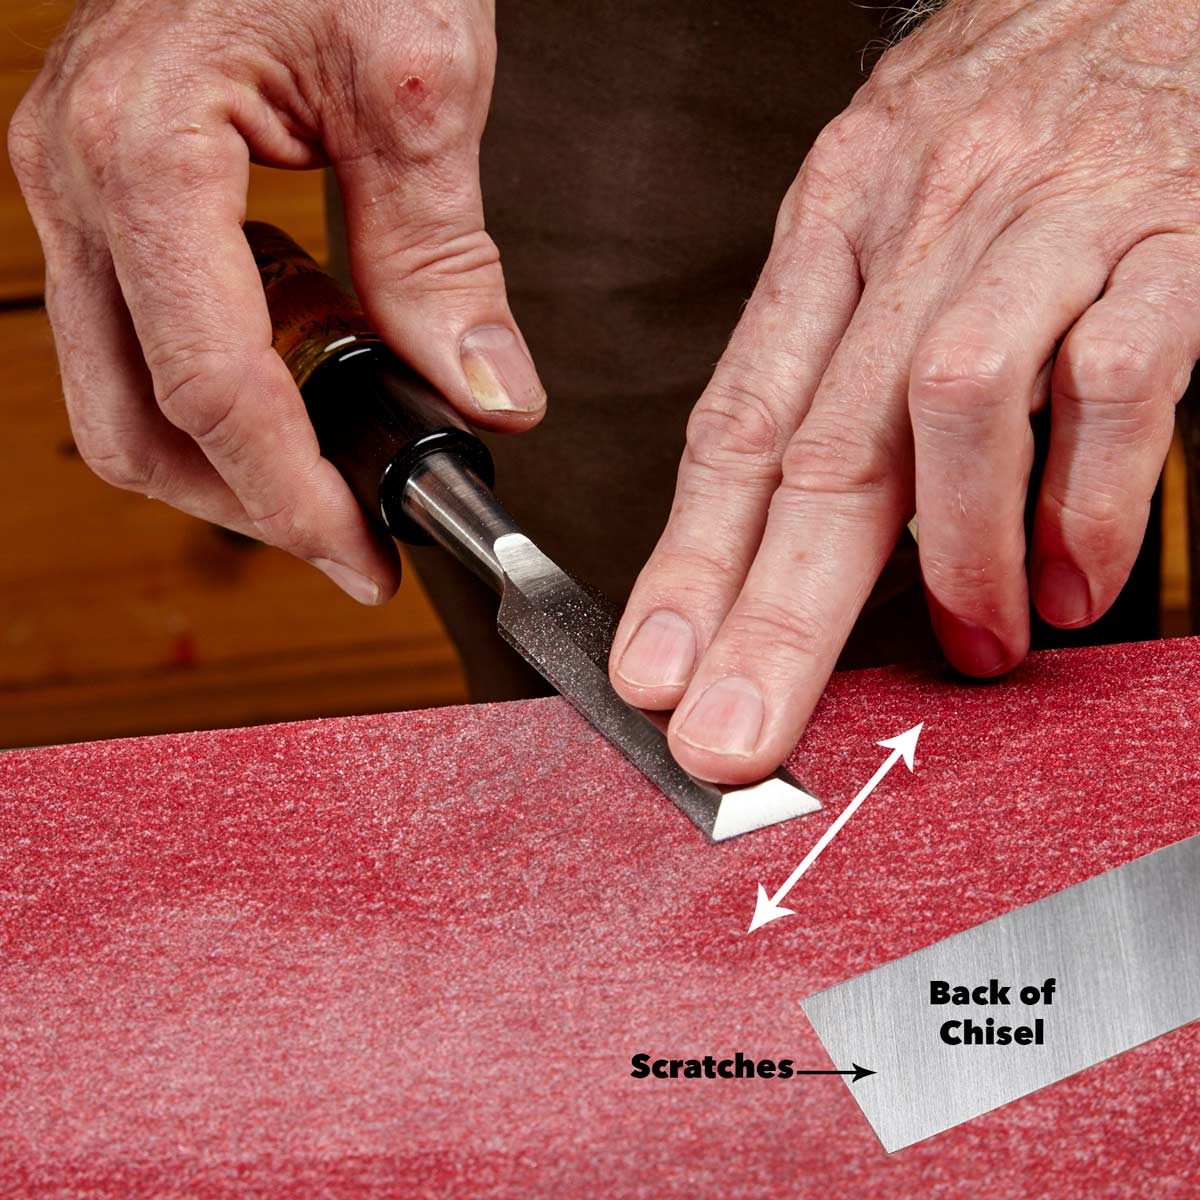 Want to learn how to sharpen chisels? Knivesandtools explains!